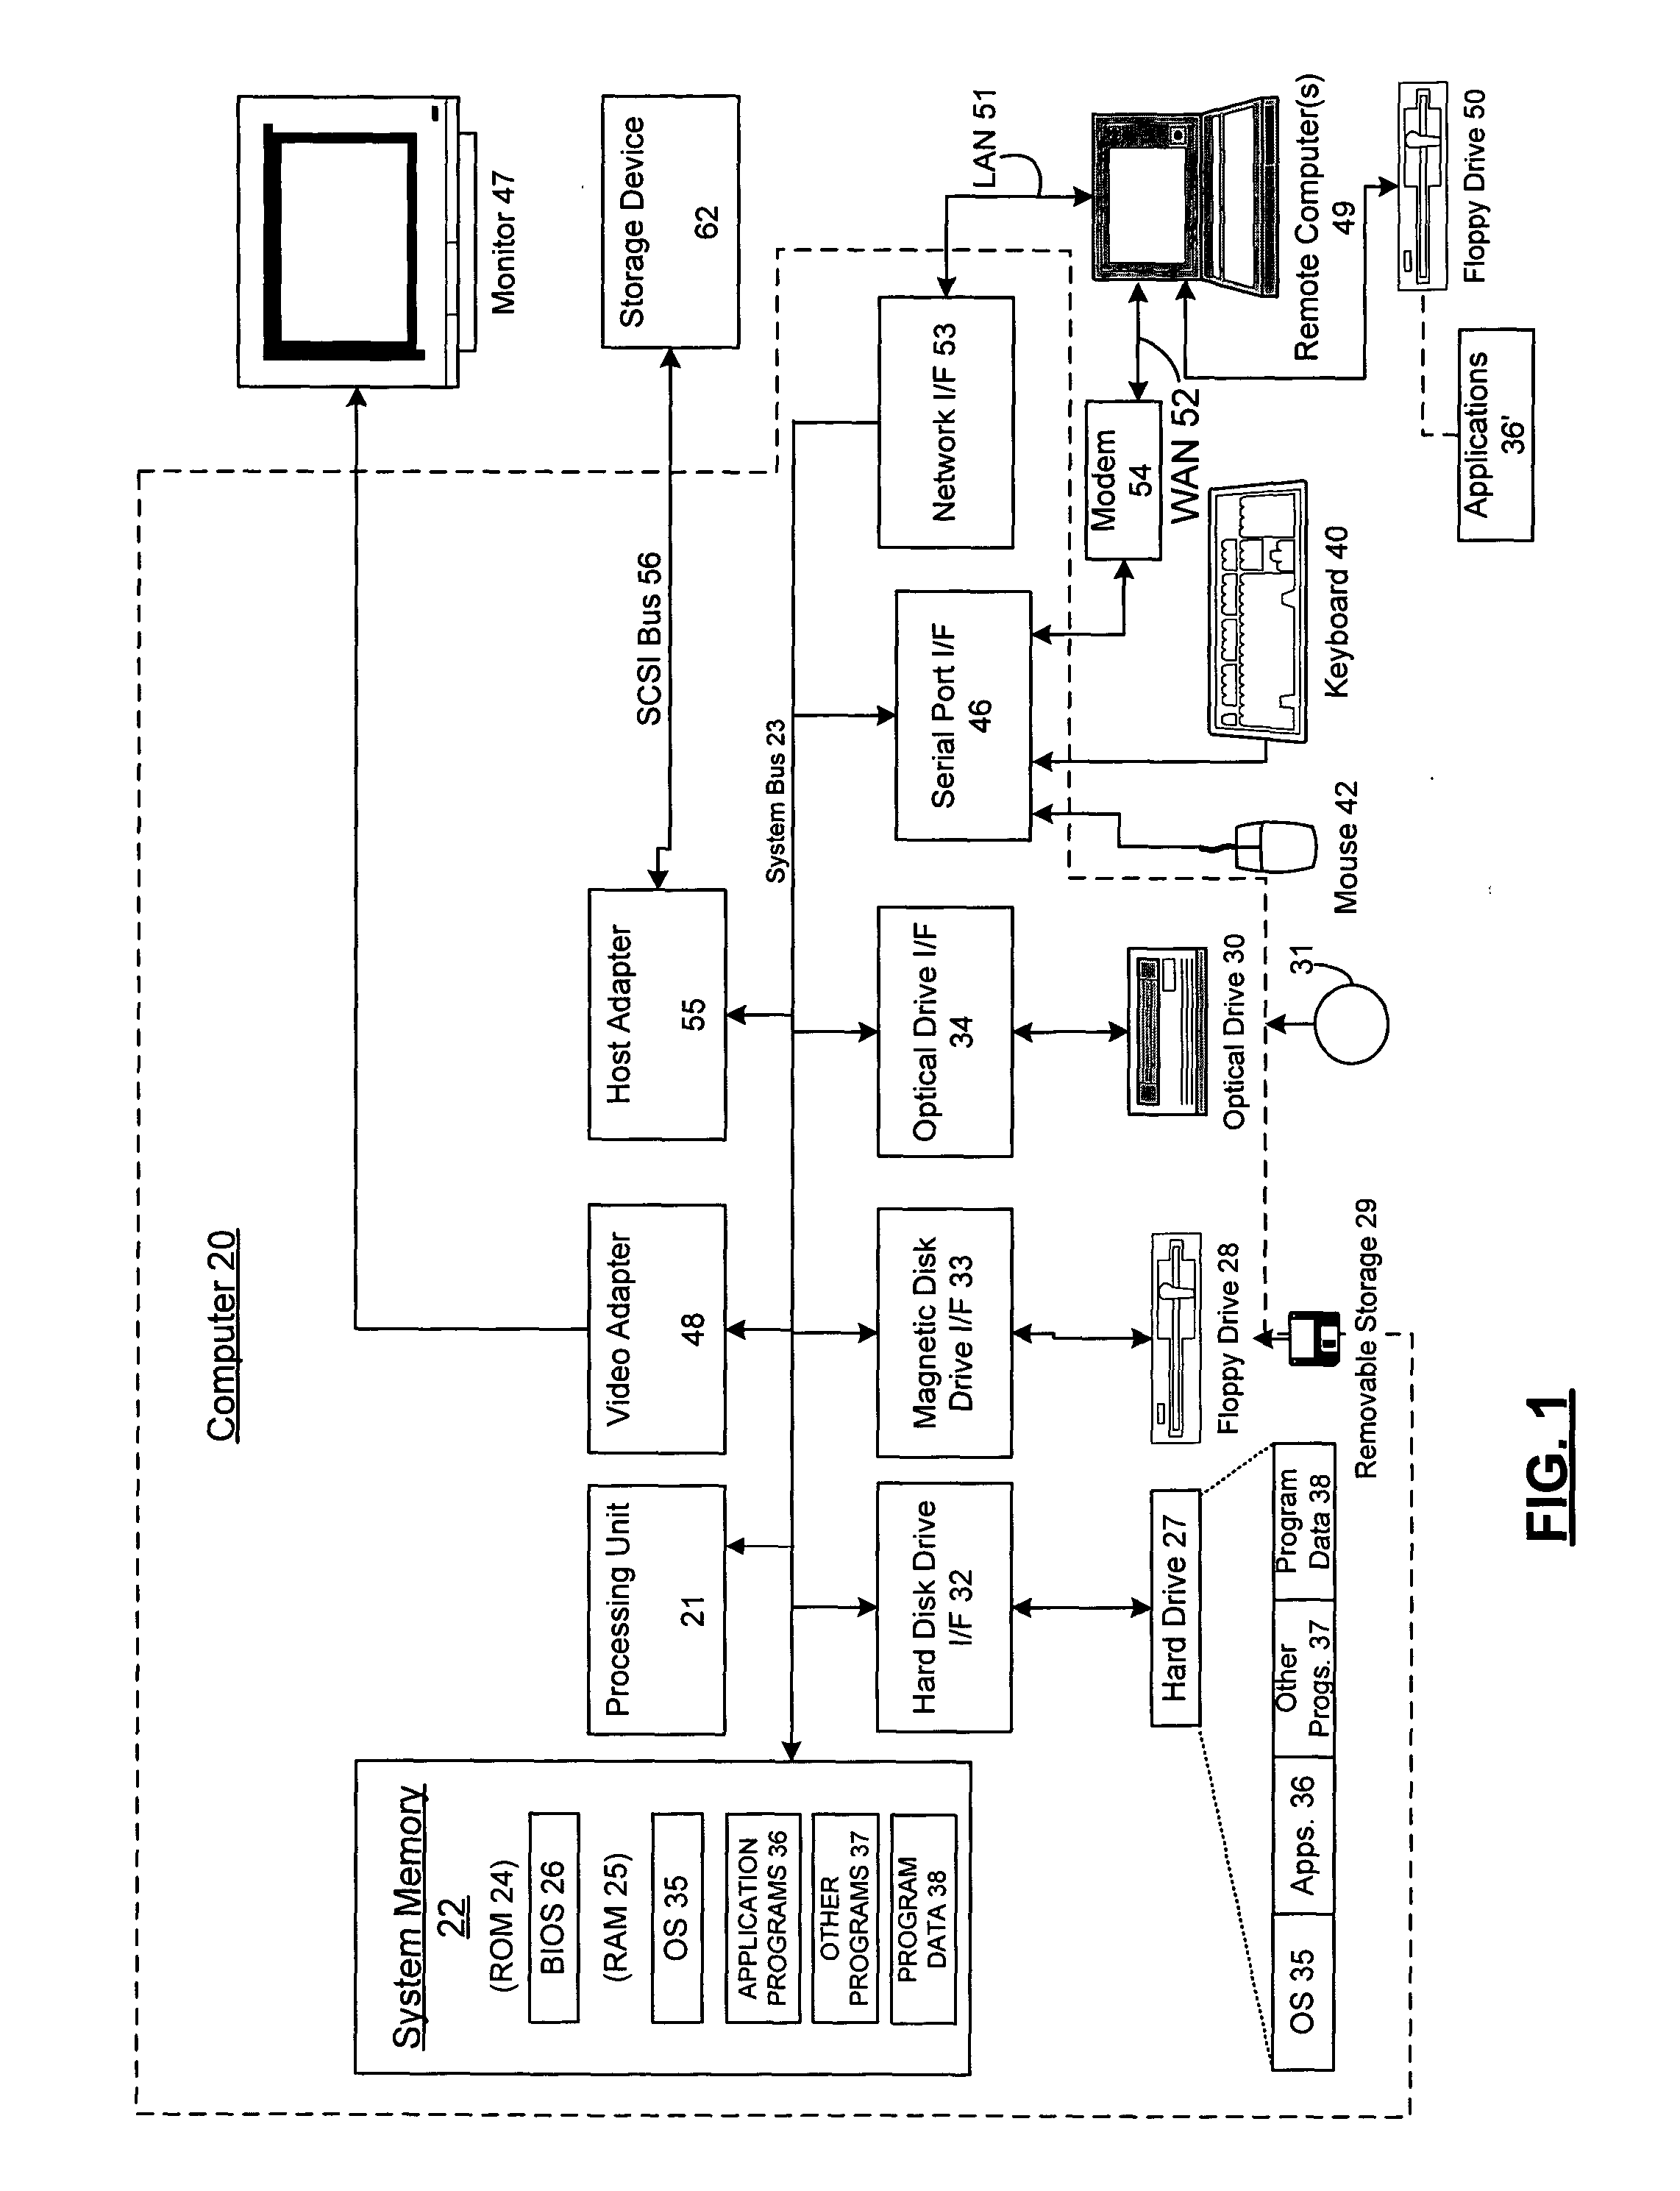 Systems and method for representing relationships between units of information manageable by a hardware/software interface system